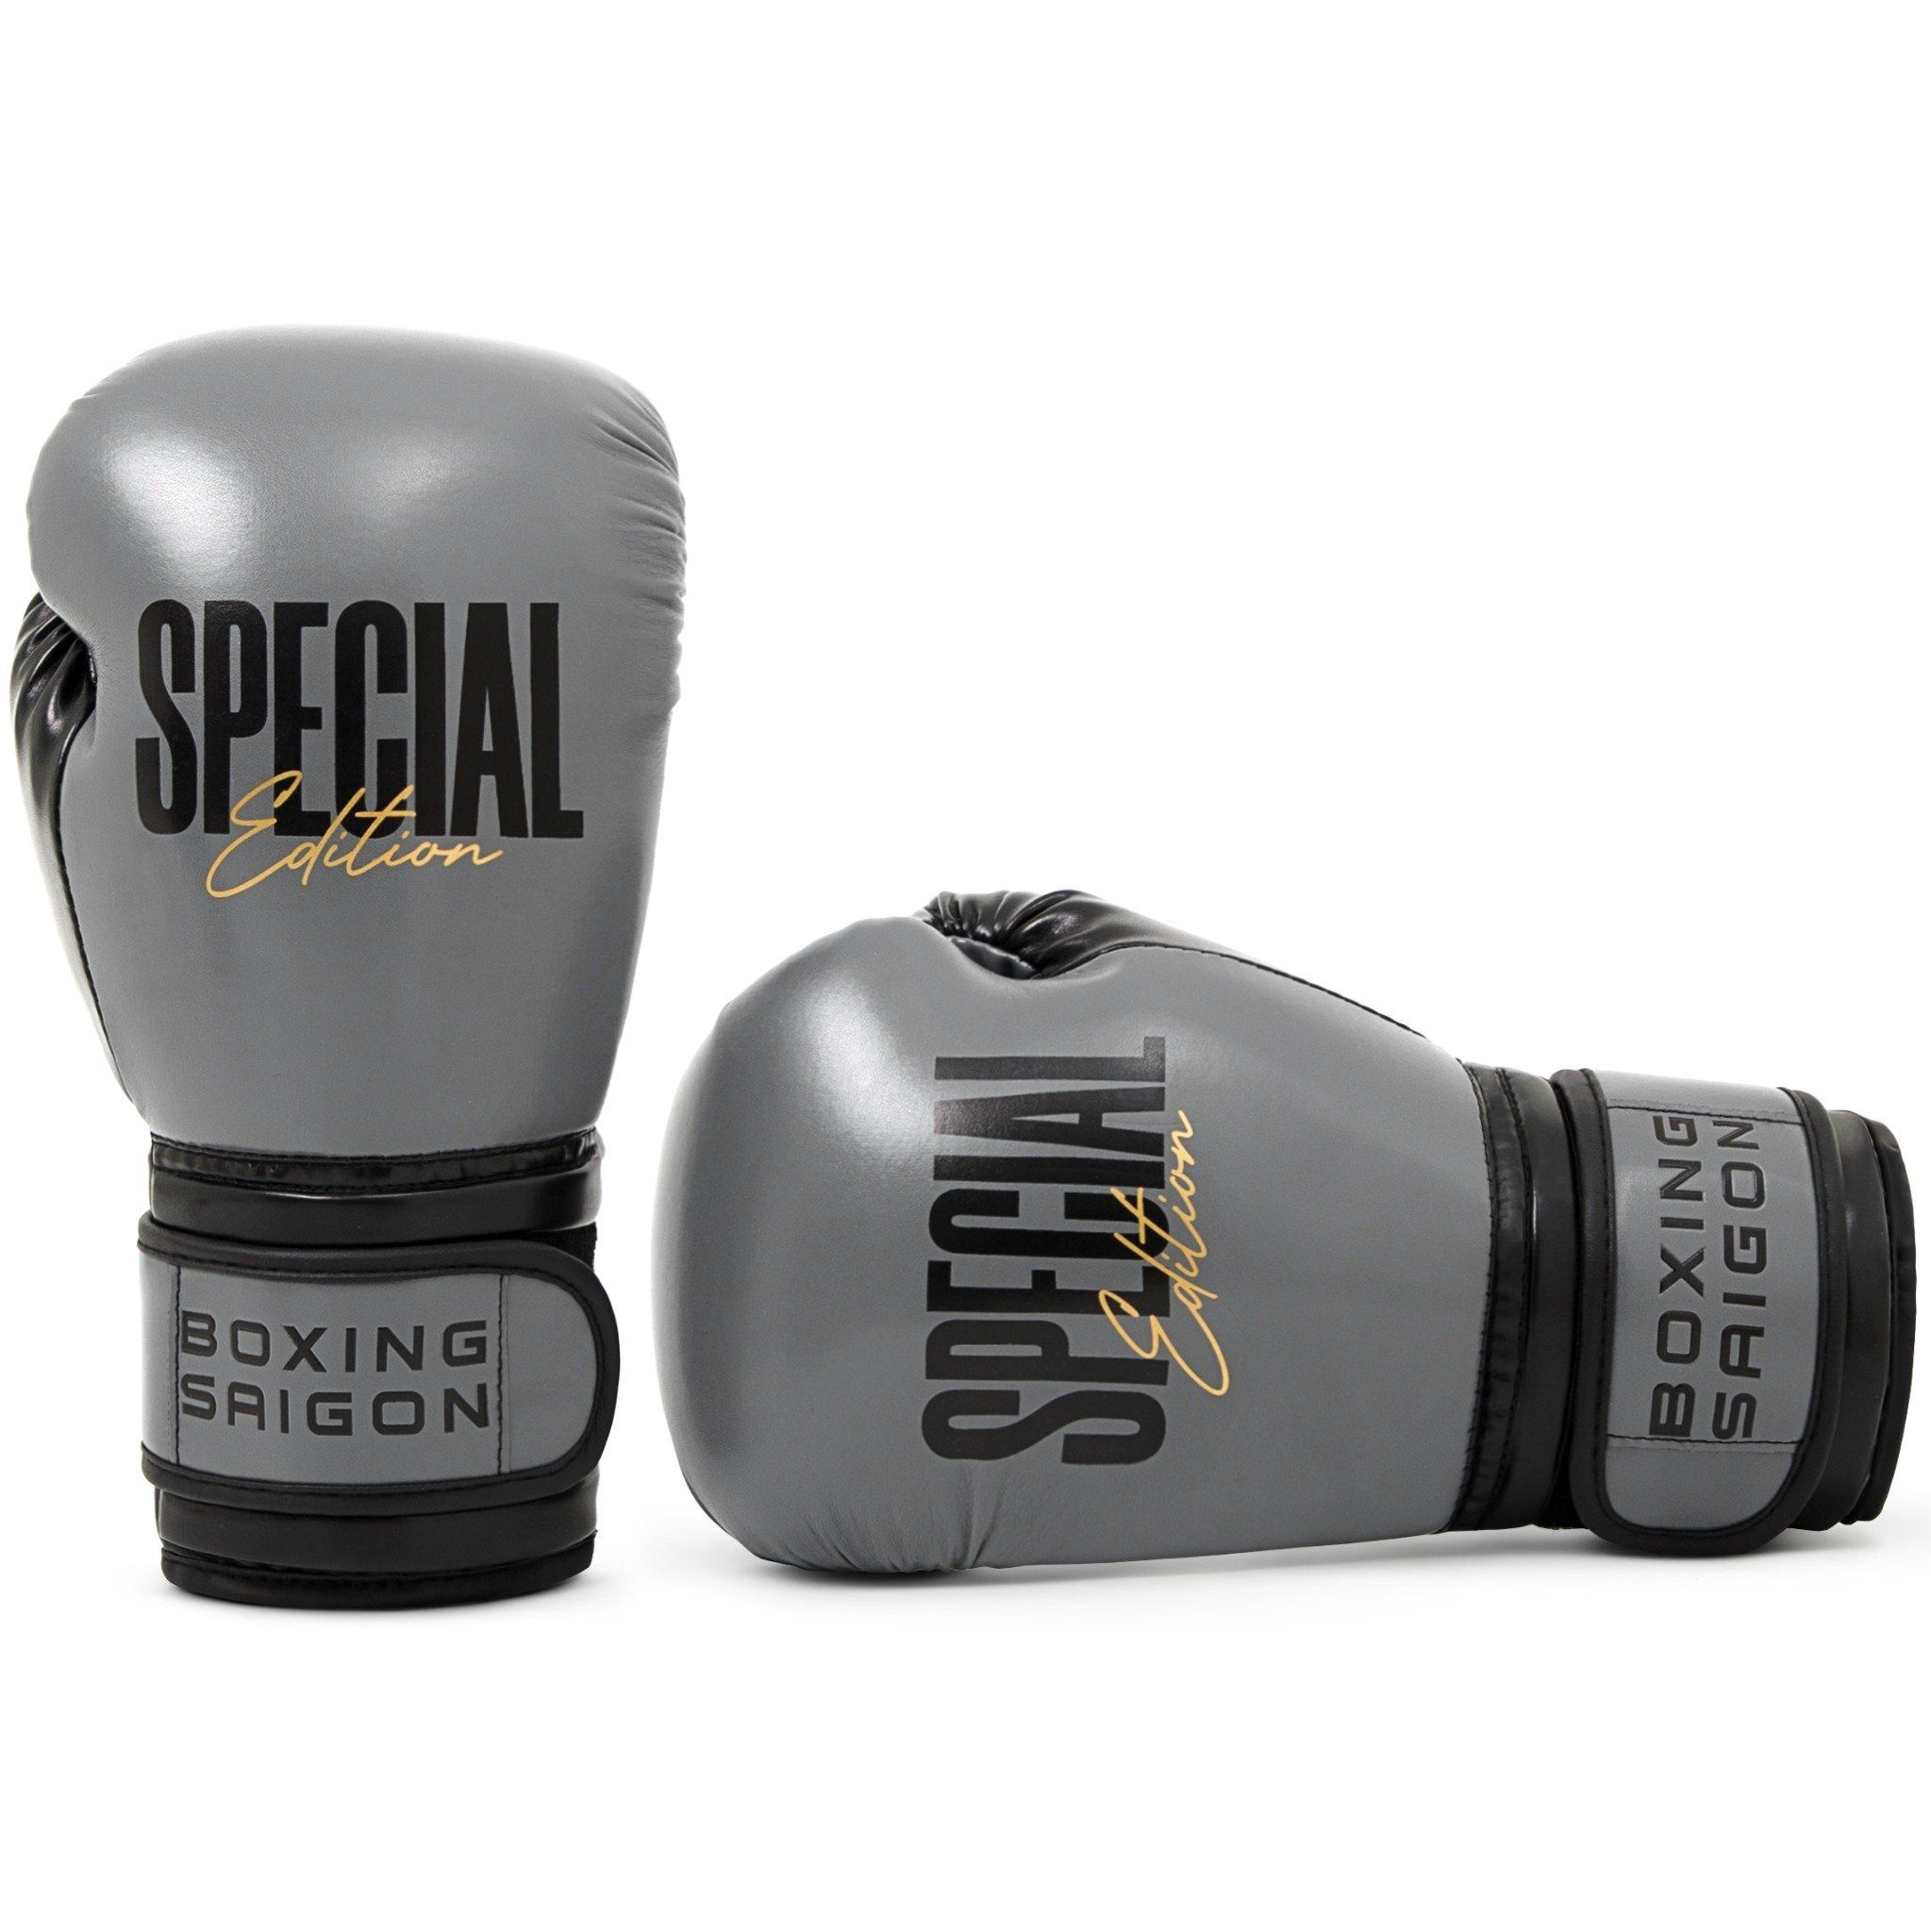 Găng Tay Boxing Saigon Special Edition Gloves - Charcoal